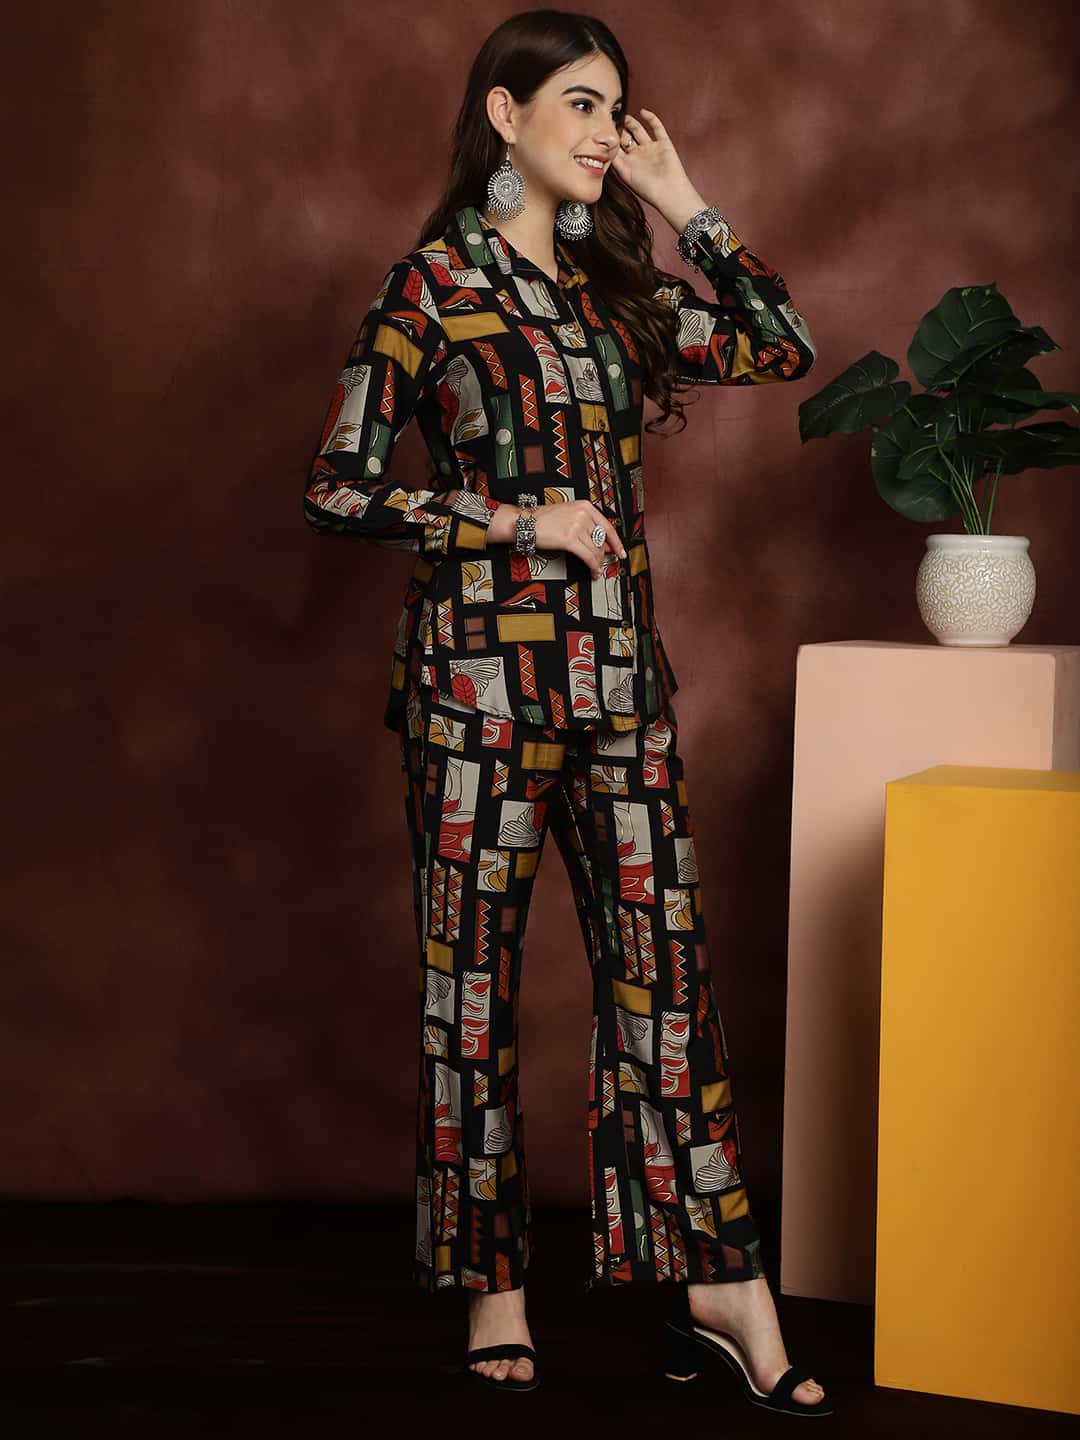 Black Abstract Printed Chanderi Silk Shirt With Trousers Co-ord Set Claura Designs Pvt. Ltd. Cord set Abstract, Chanderi Silk, Co-ord, Co-ord Set, Ethnic, Printed, Rayon